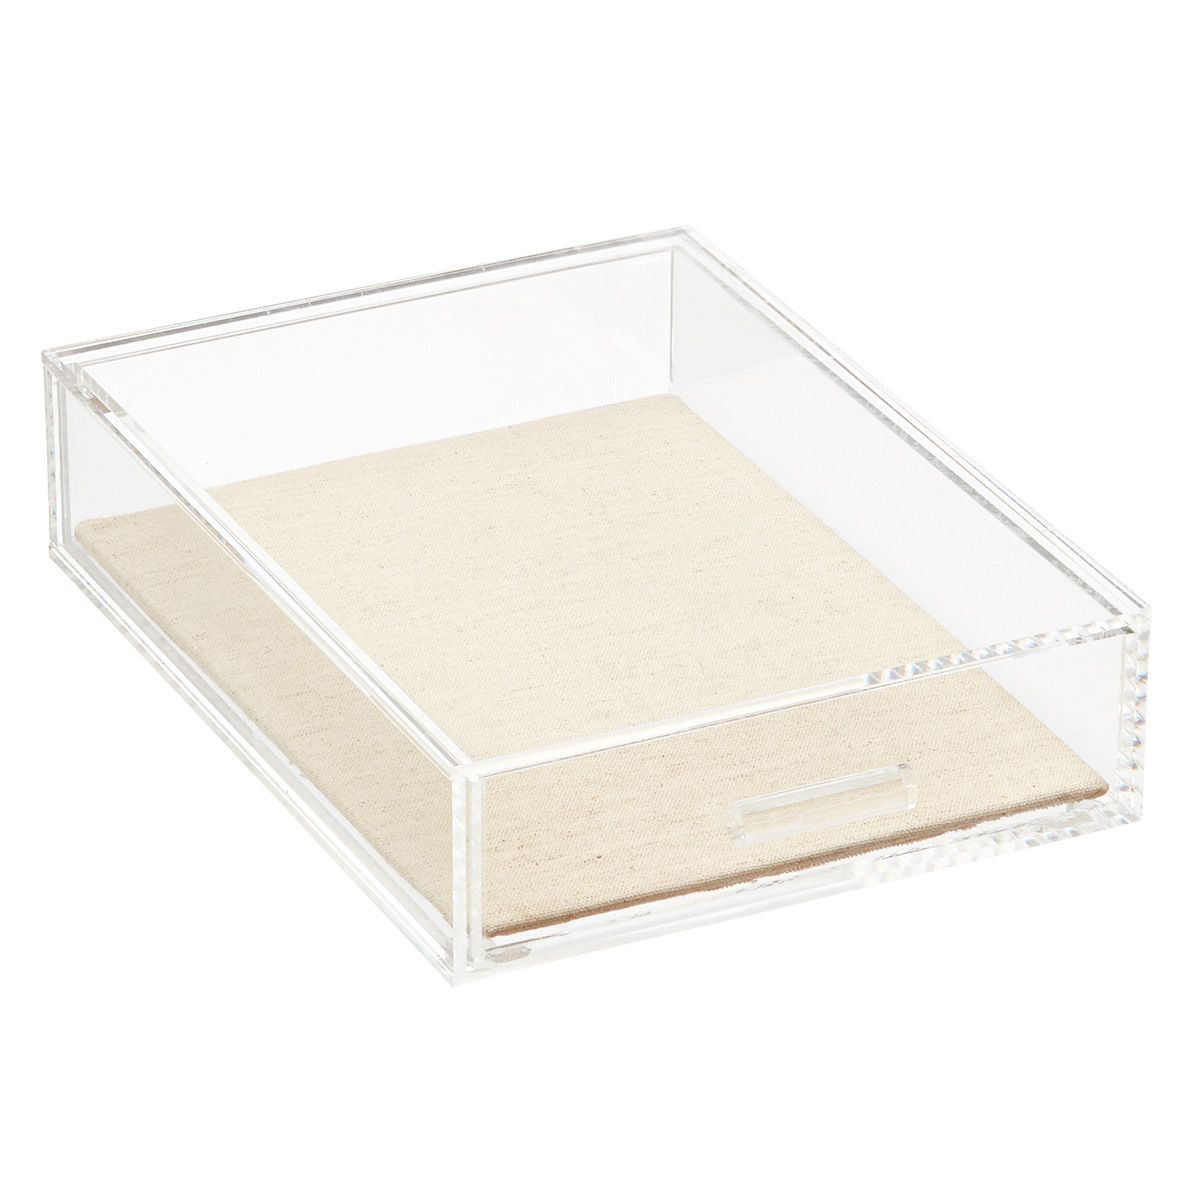 The Container Store 1-Compartment Narrow Luxe Acrylic Jewelry Drawer Clear/Linen | The Container Store